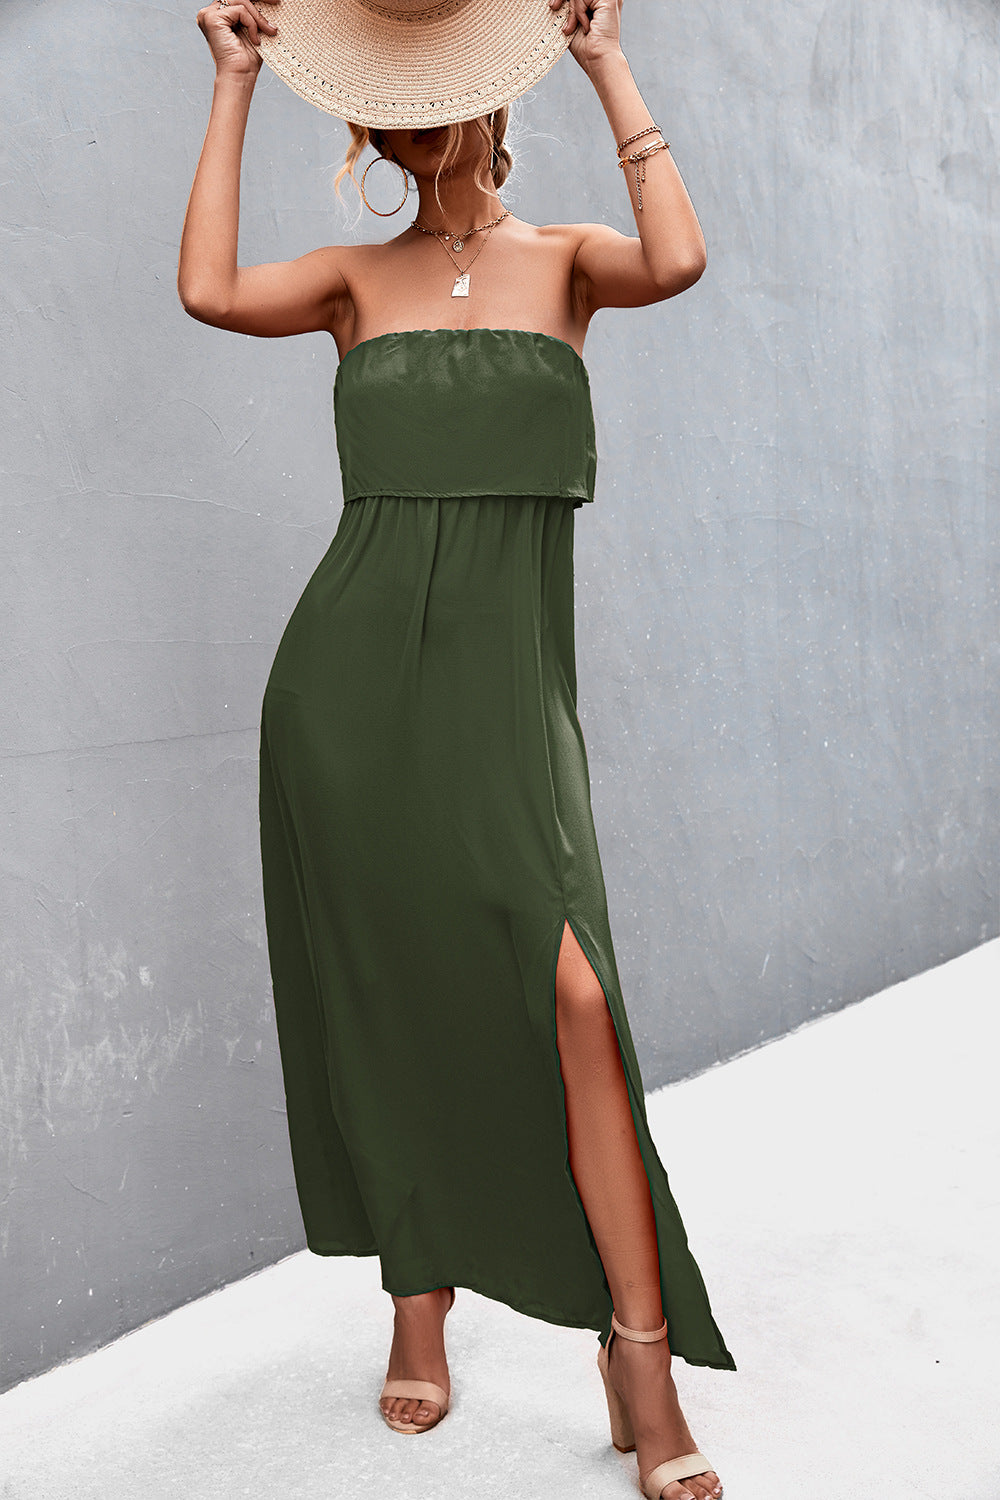 ARMY GREEN - Strapless Split Maxi Dress - 5 colors - womens dress at TFC&H Co.